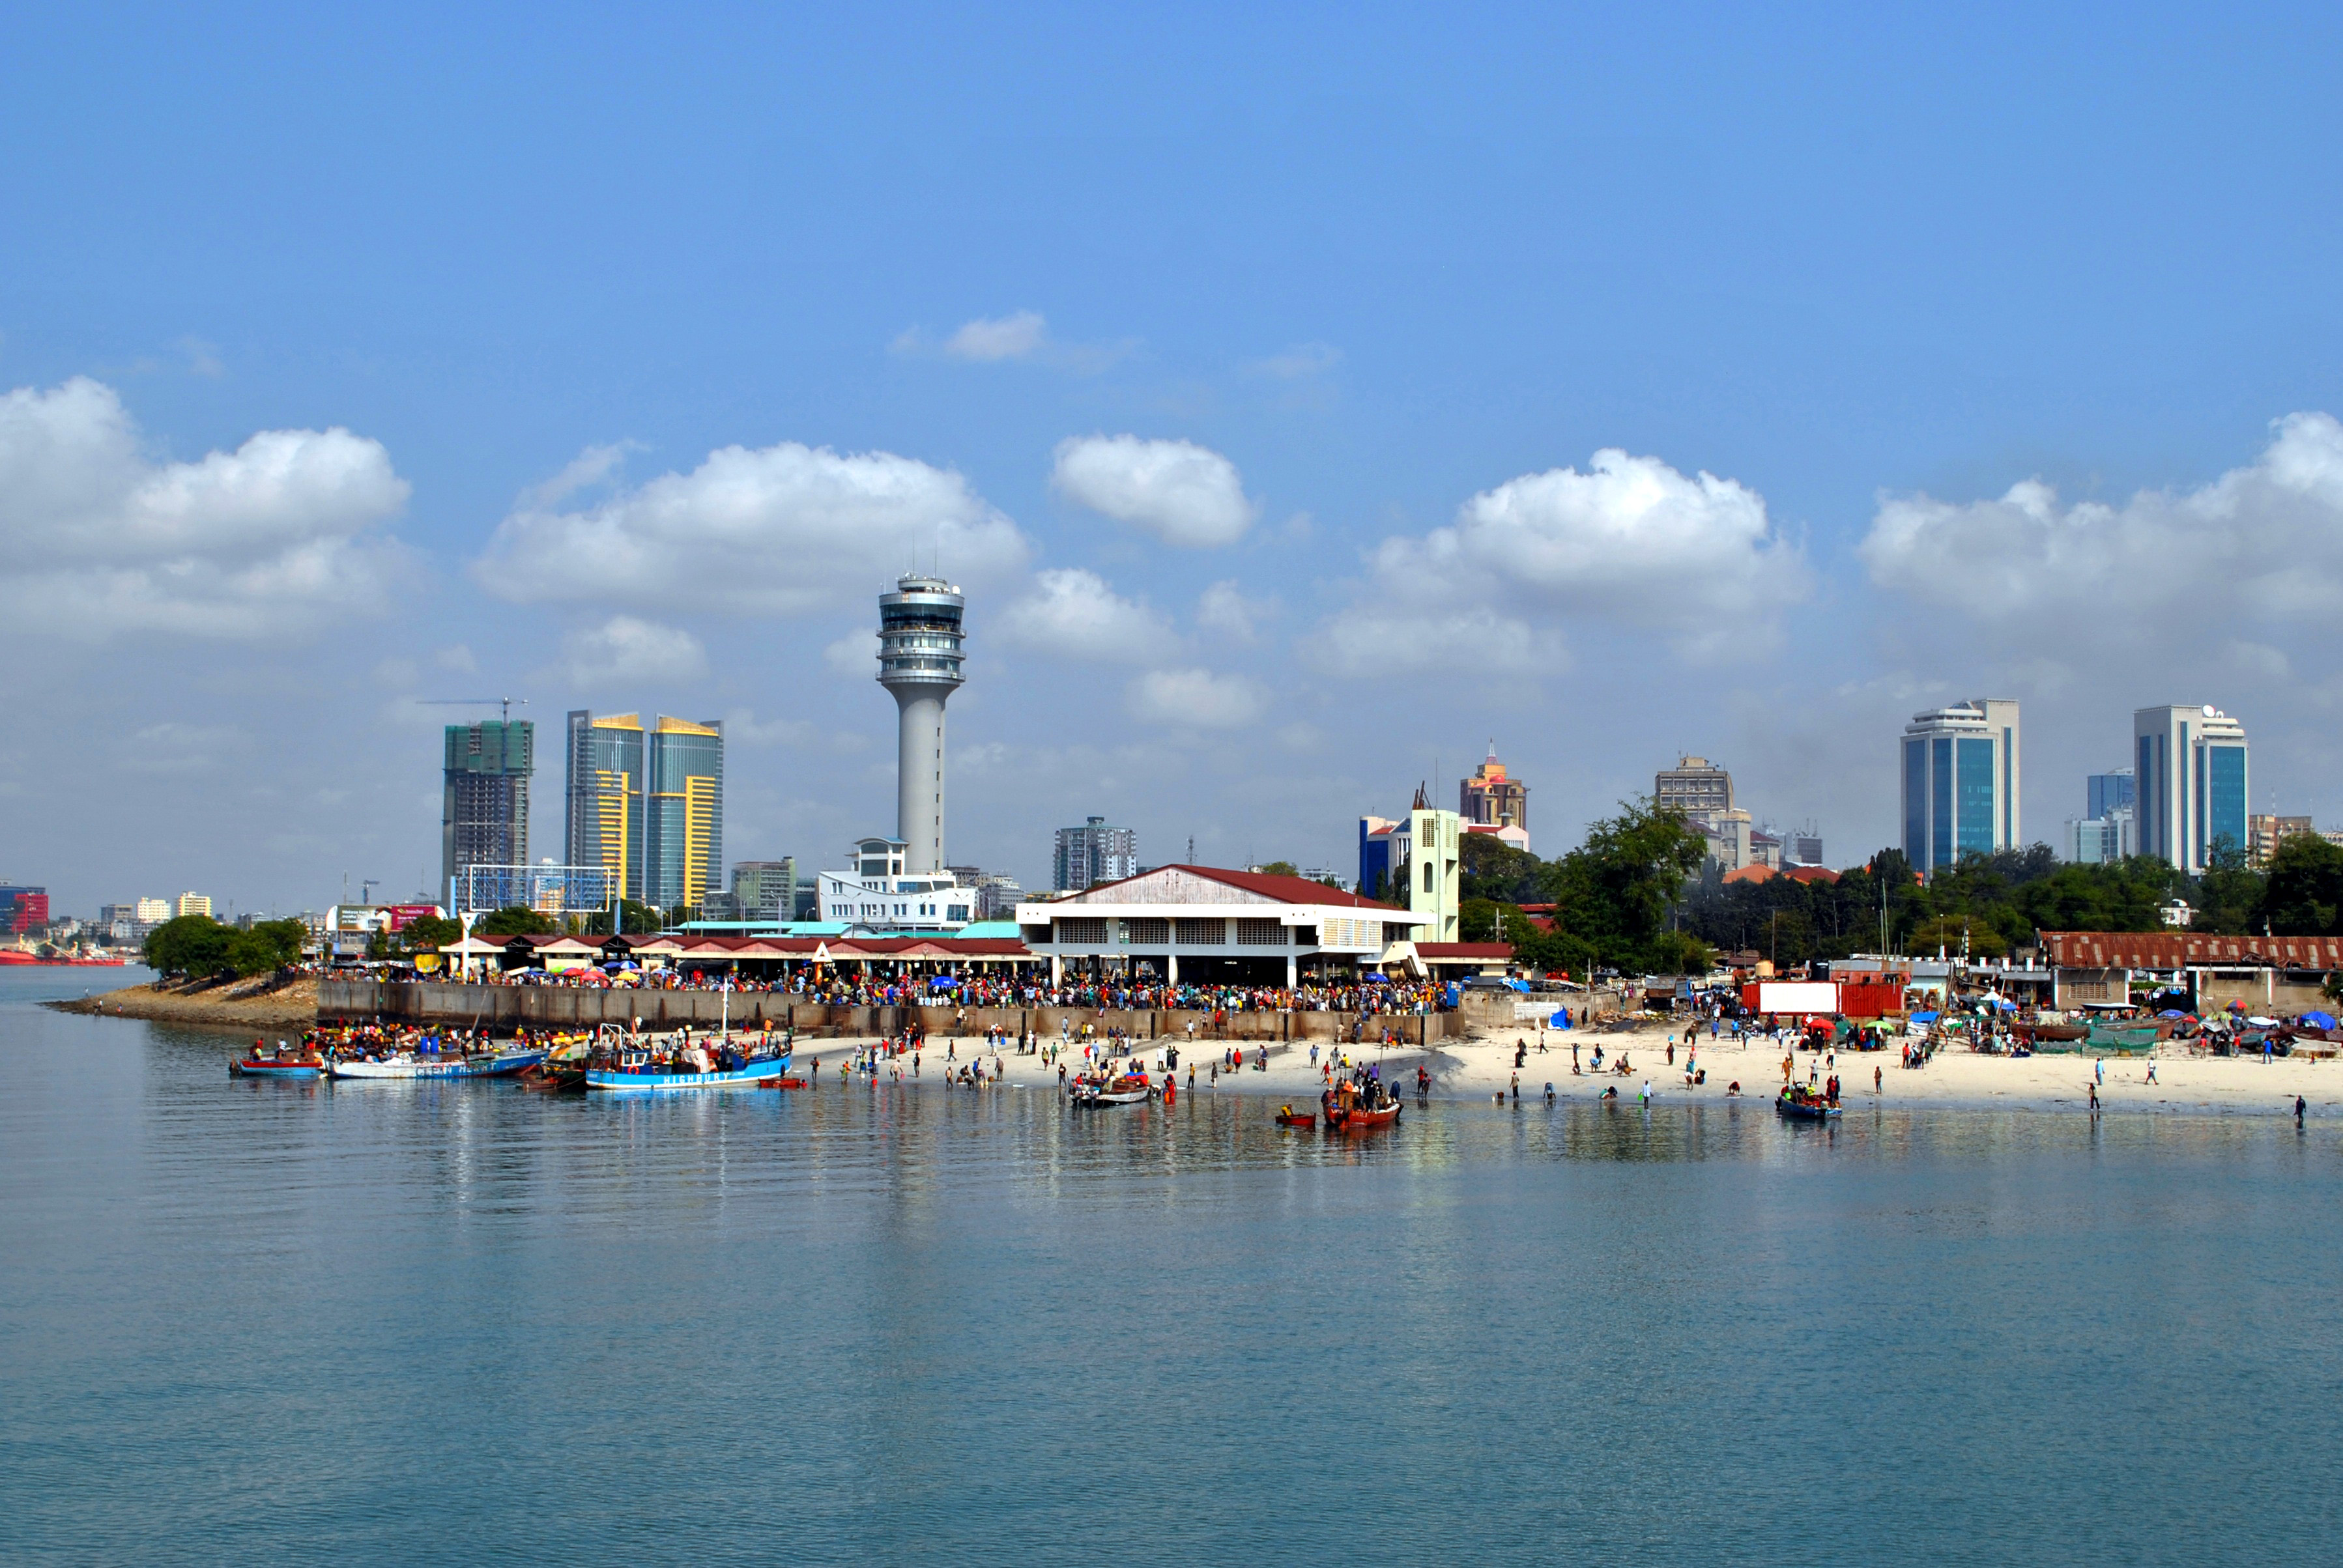 View of Dar es Salaam, the largest city in Tanzania